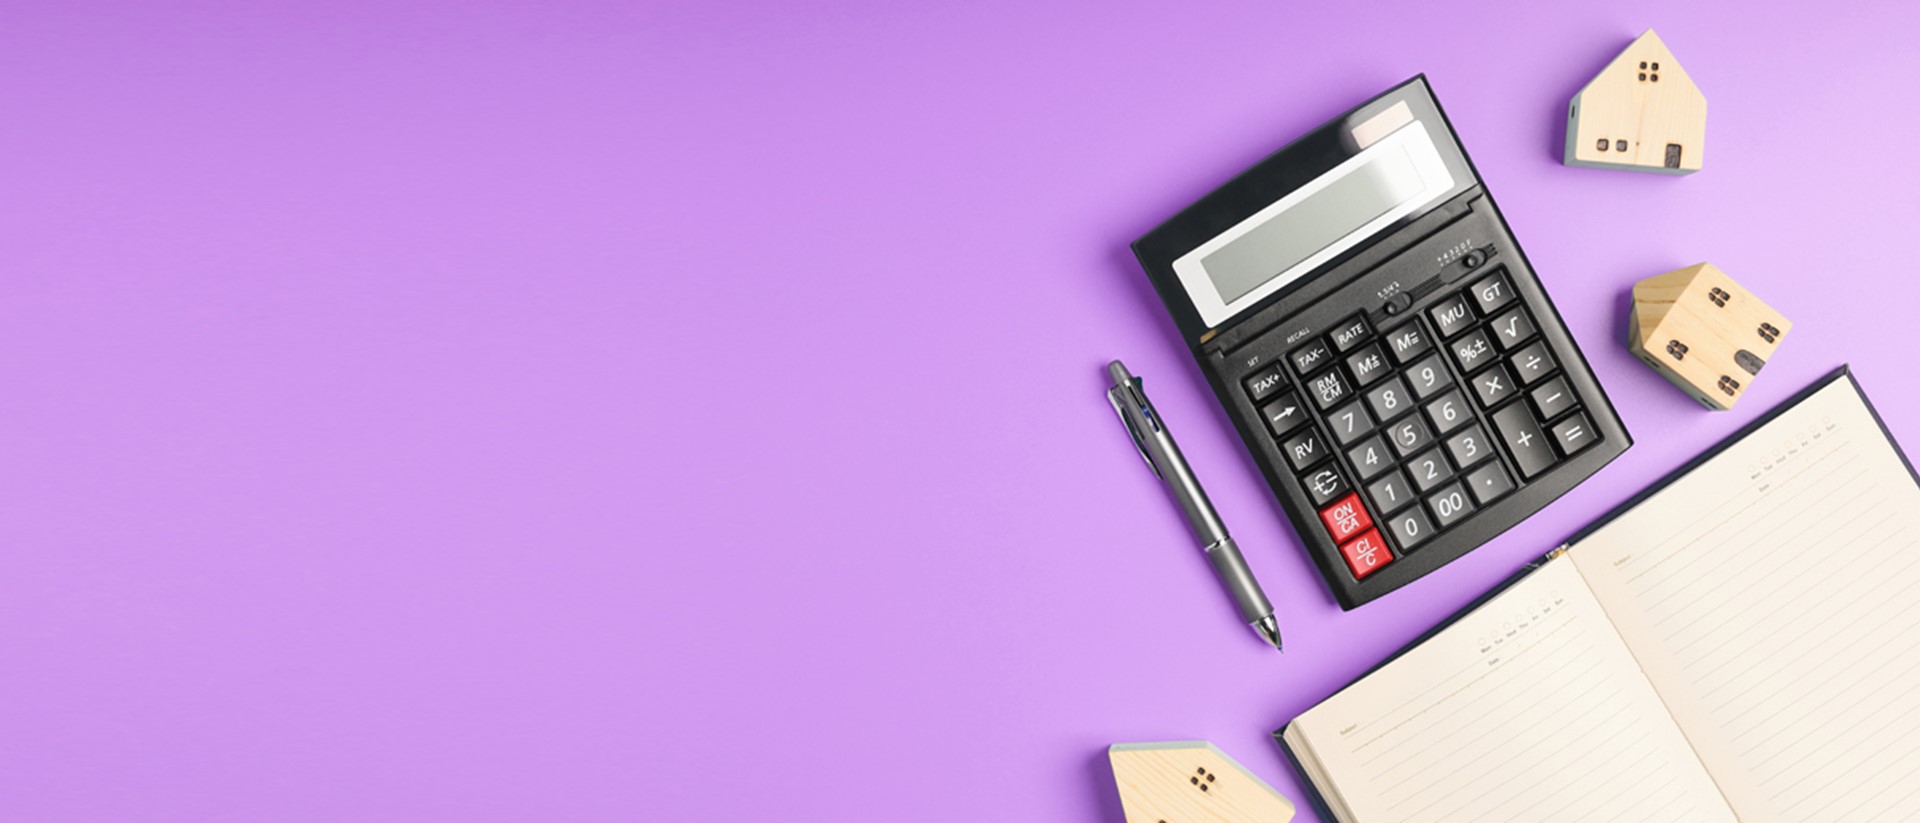 Image of a calculator and planner on a purple background